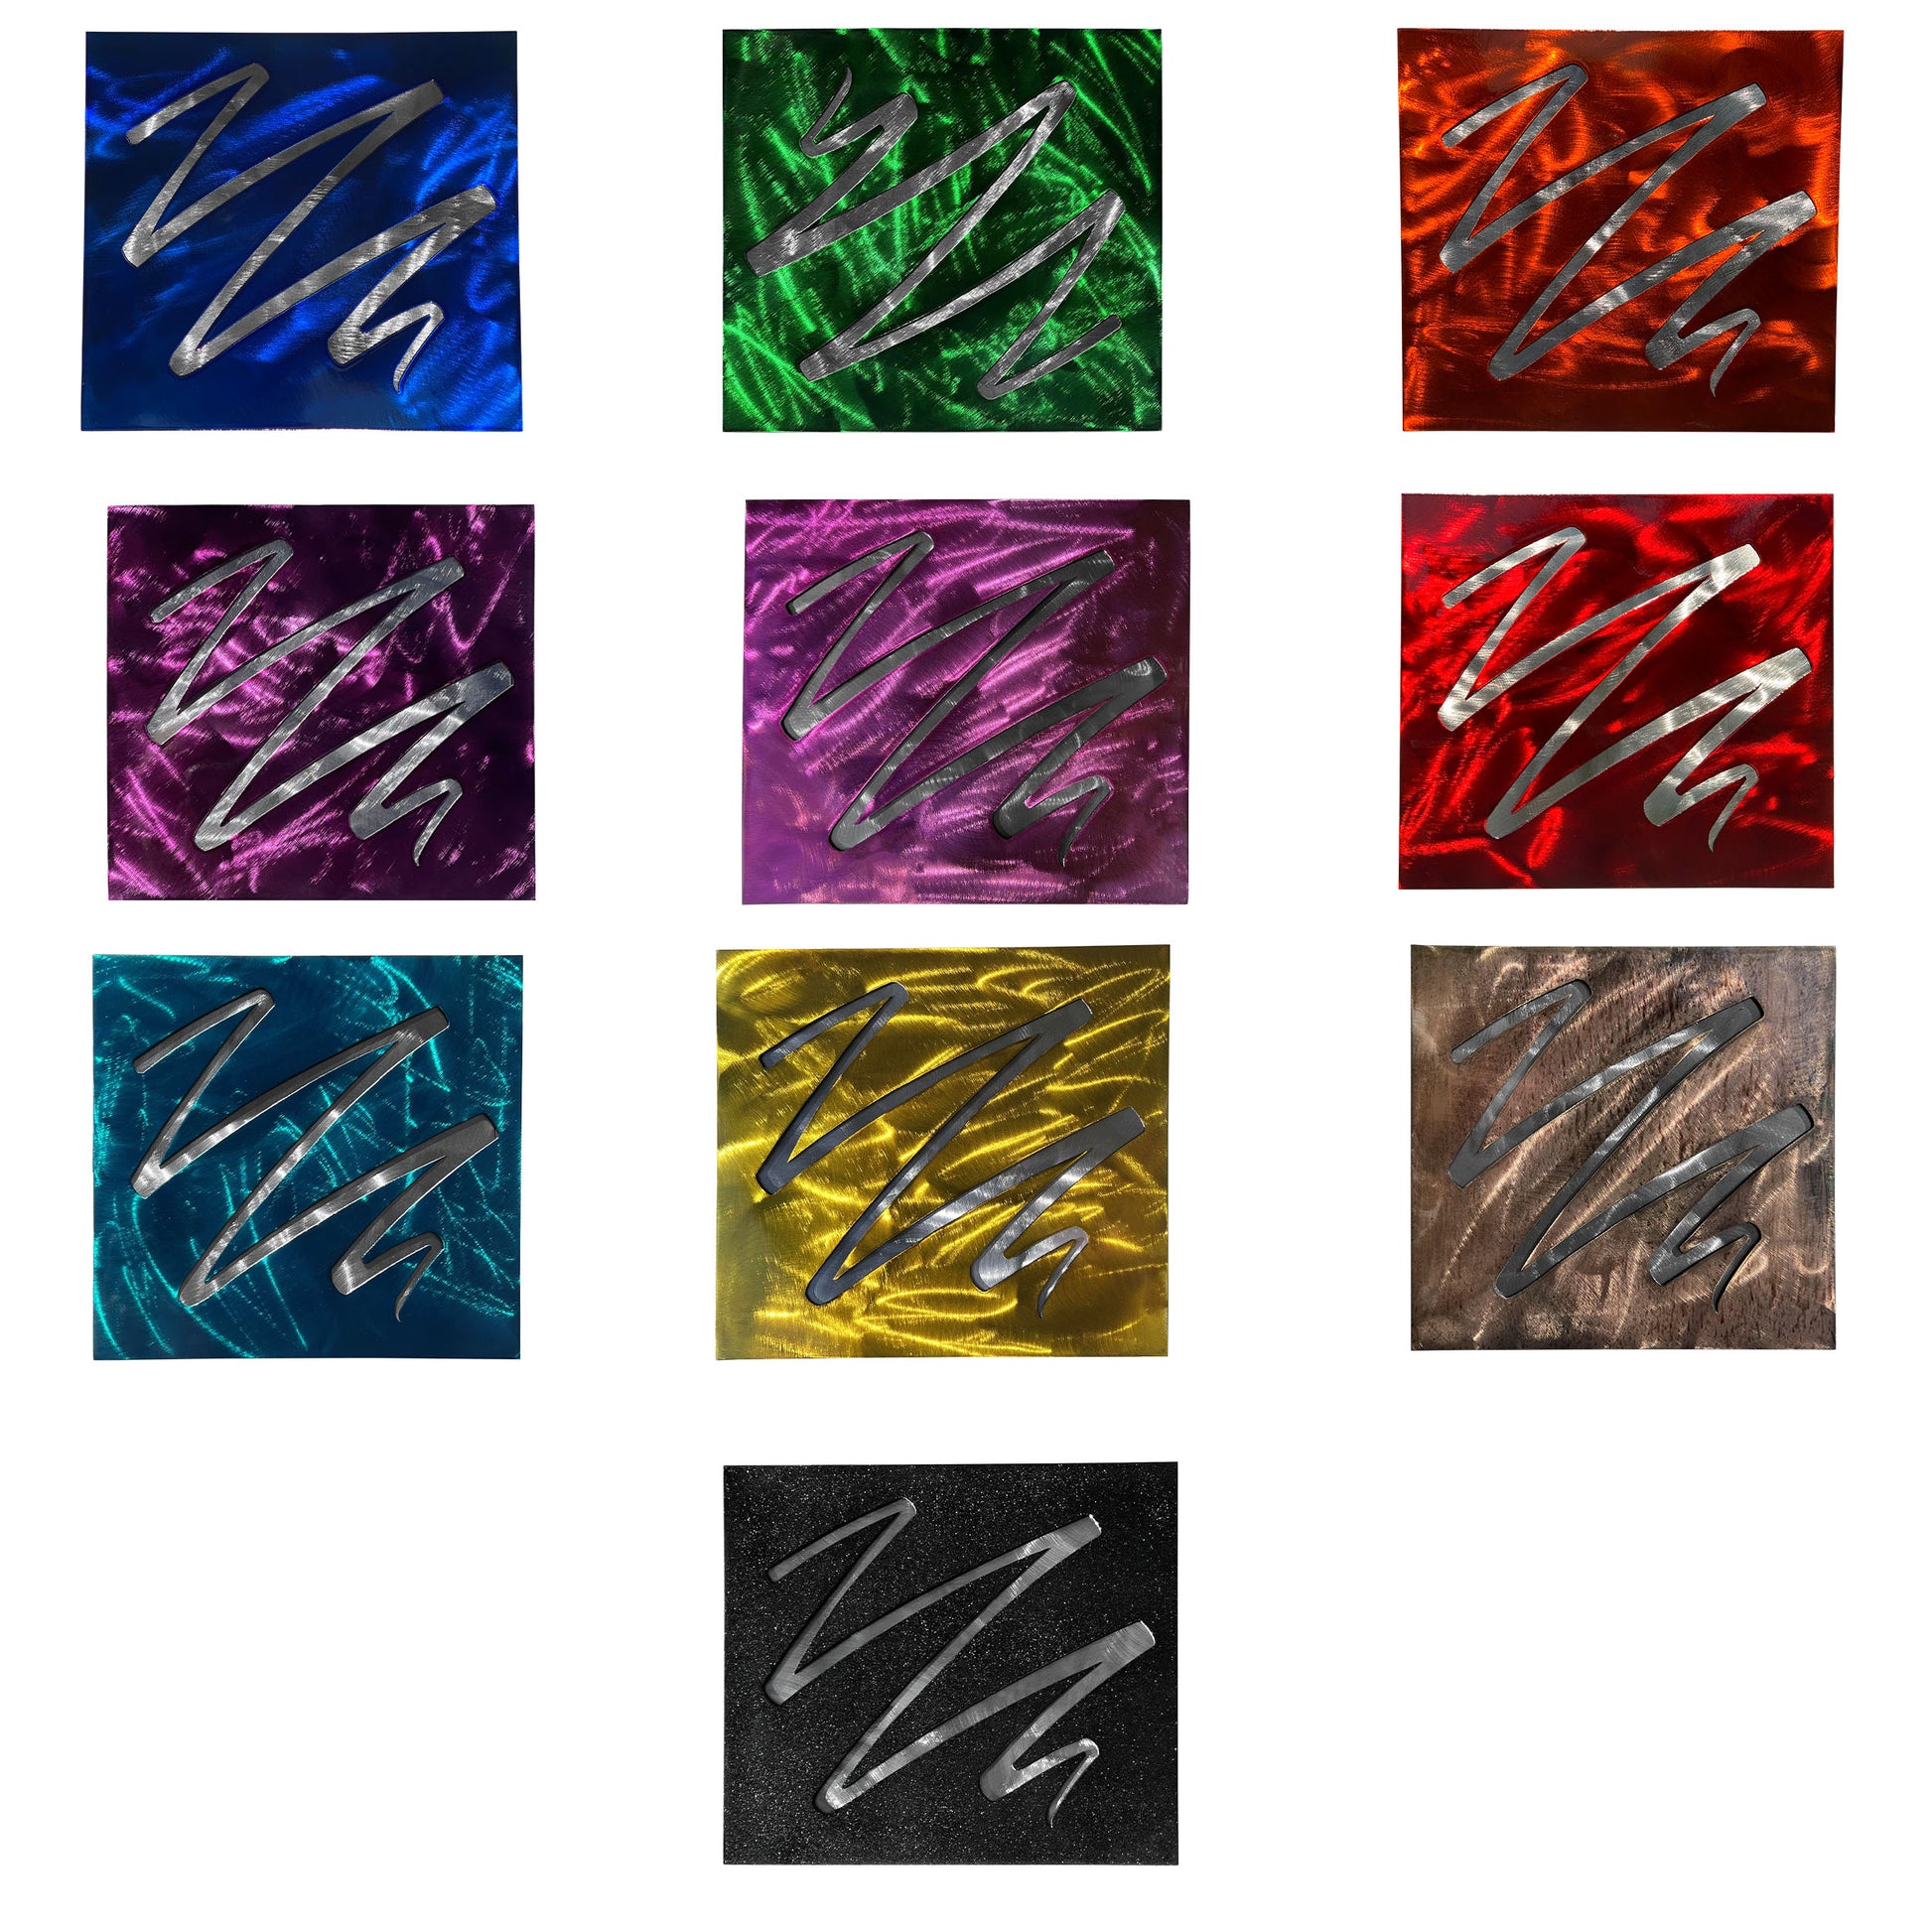 1670356426_Squiggle-allcolors